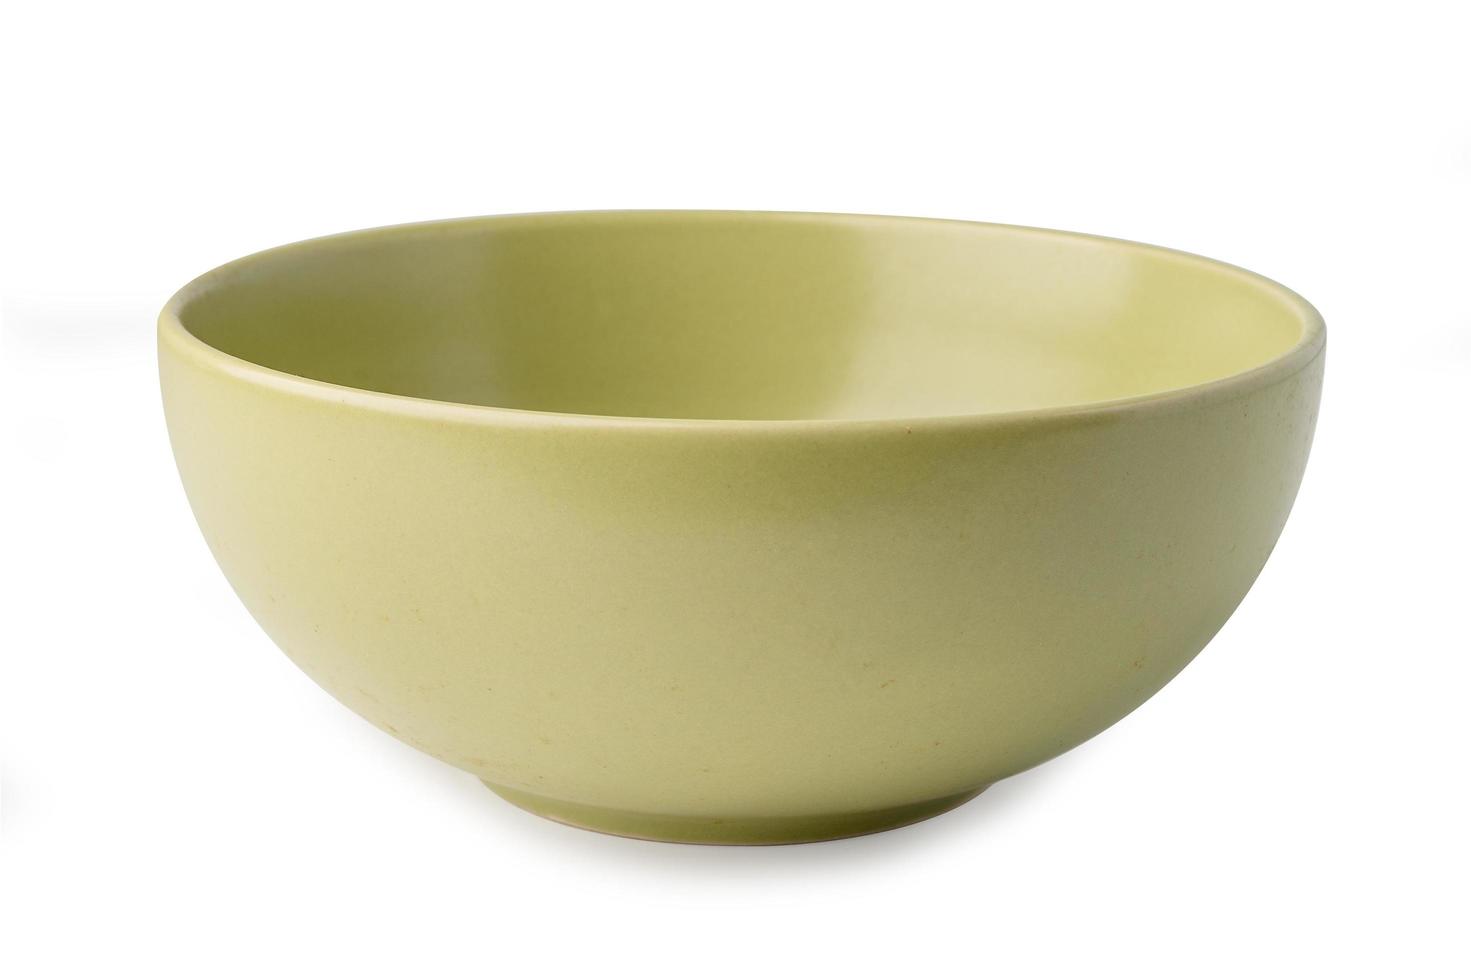 Ceramic green plate or bowl isolate on white background photo